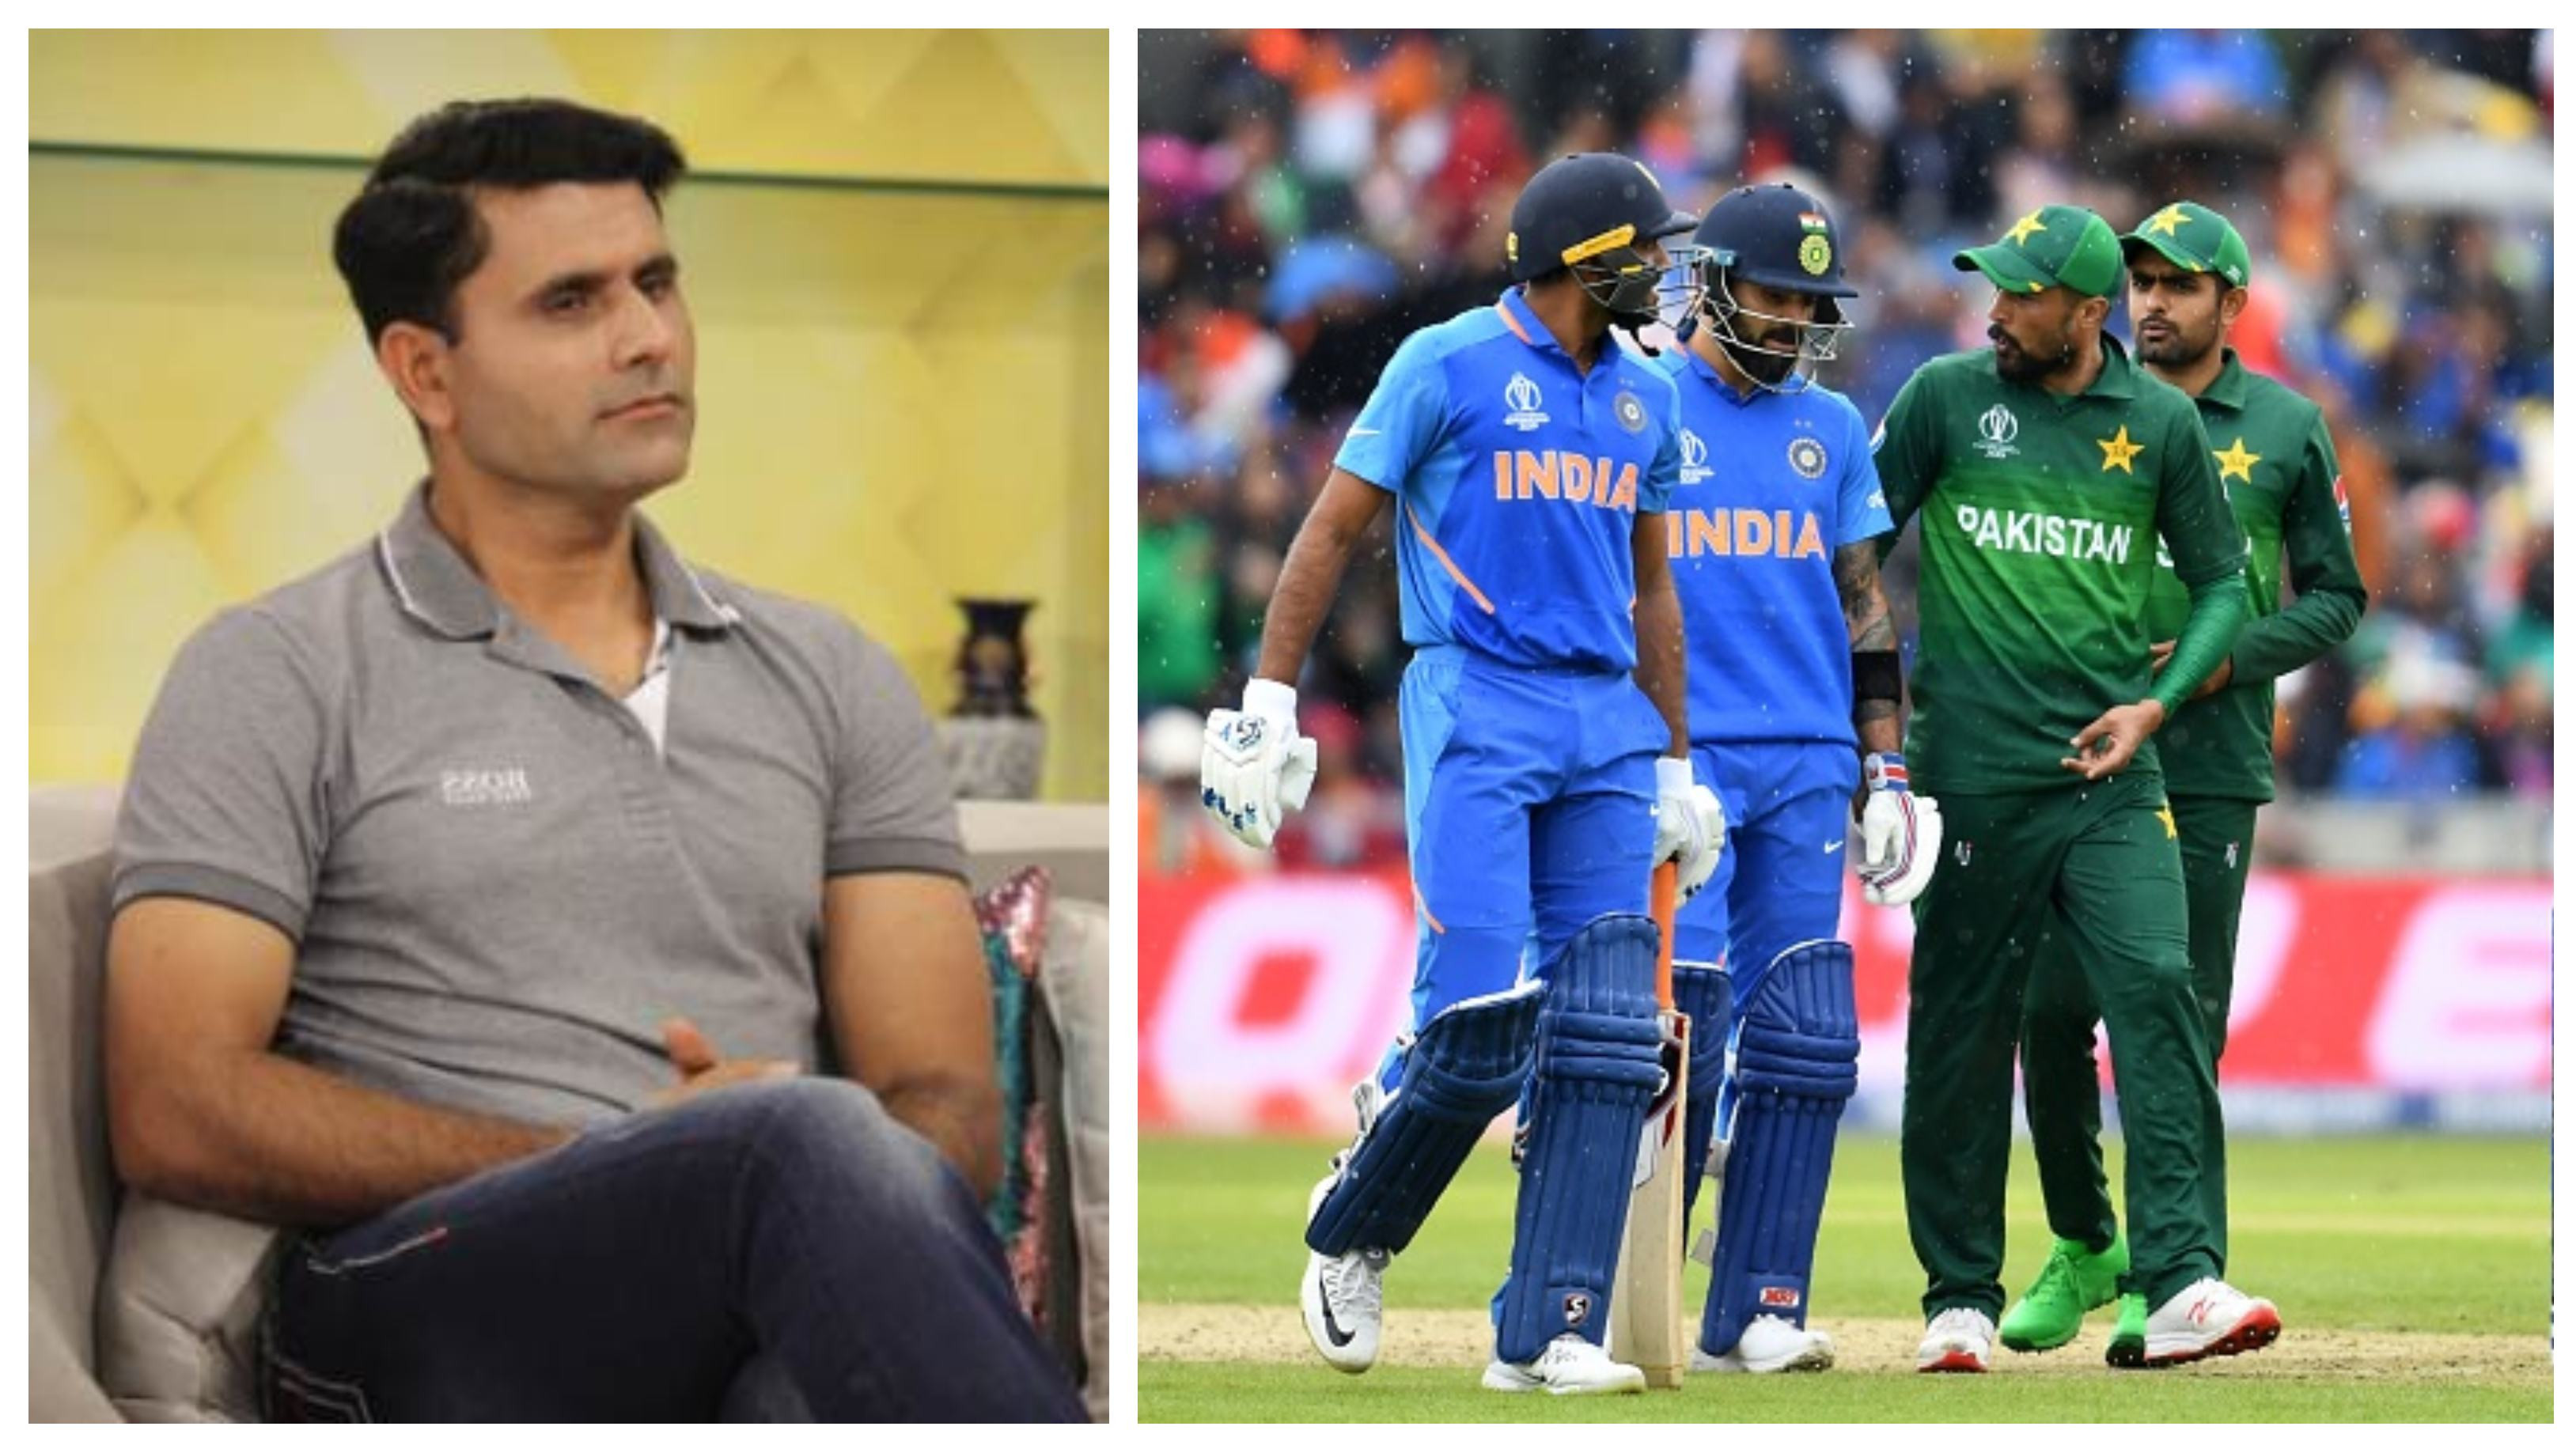 ‘The kind of talent Pakistan has is entirely different’, Abdul Razzaq feels India can’t compete with Pakistan